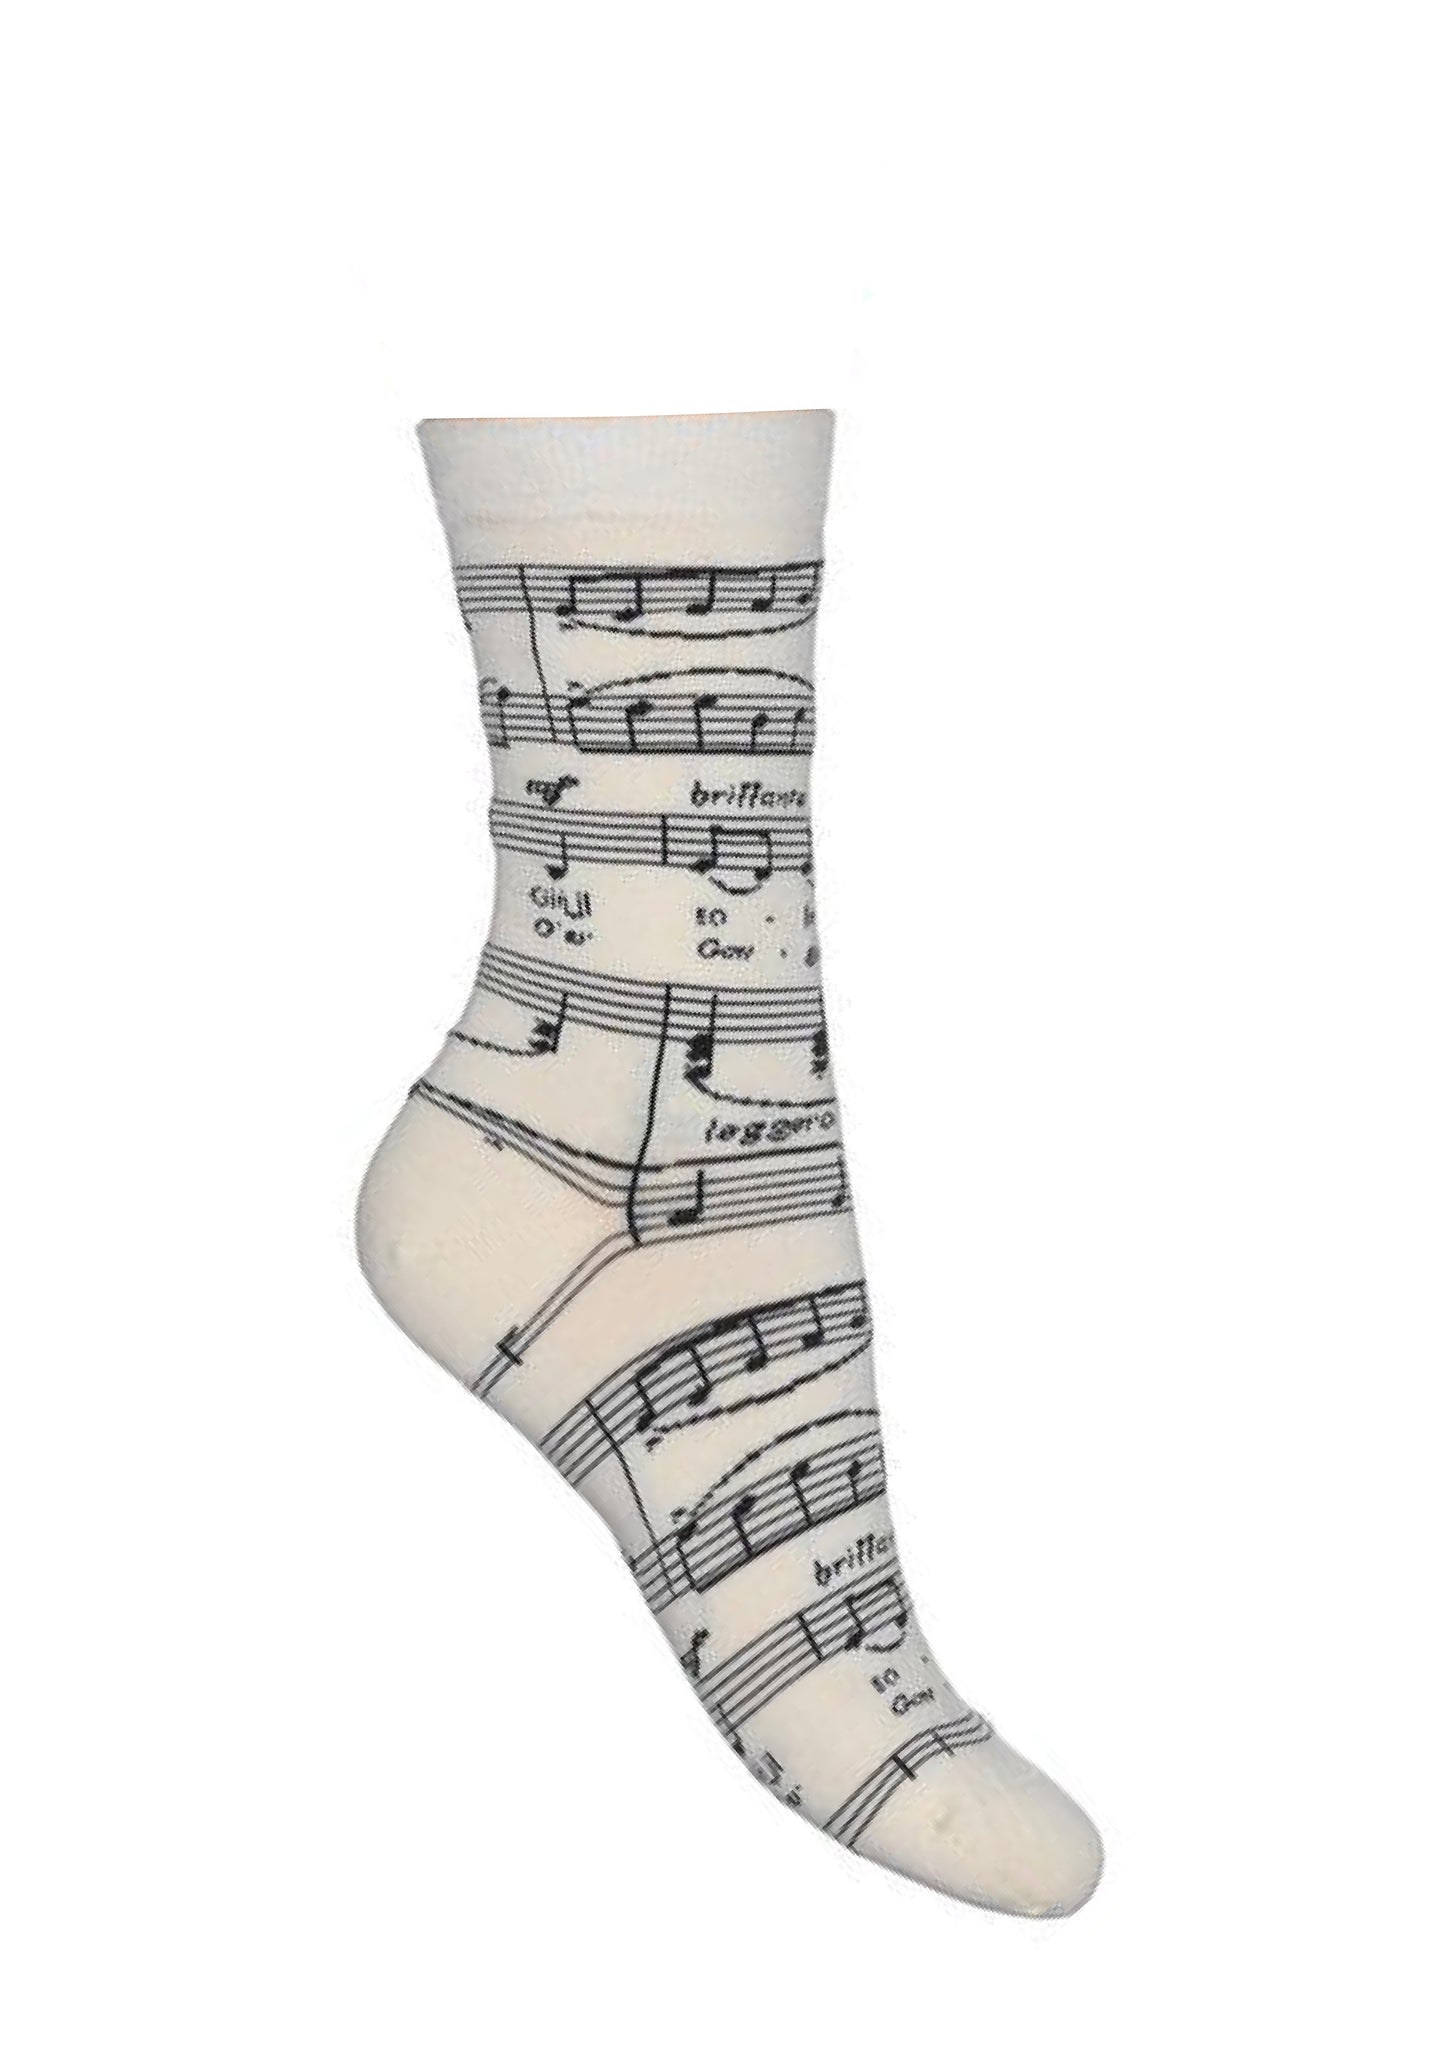 Bonnie Doon Brillante Sock - Off white cotton mix ankle socks with a woven black music notes pattern.